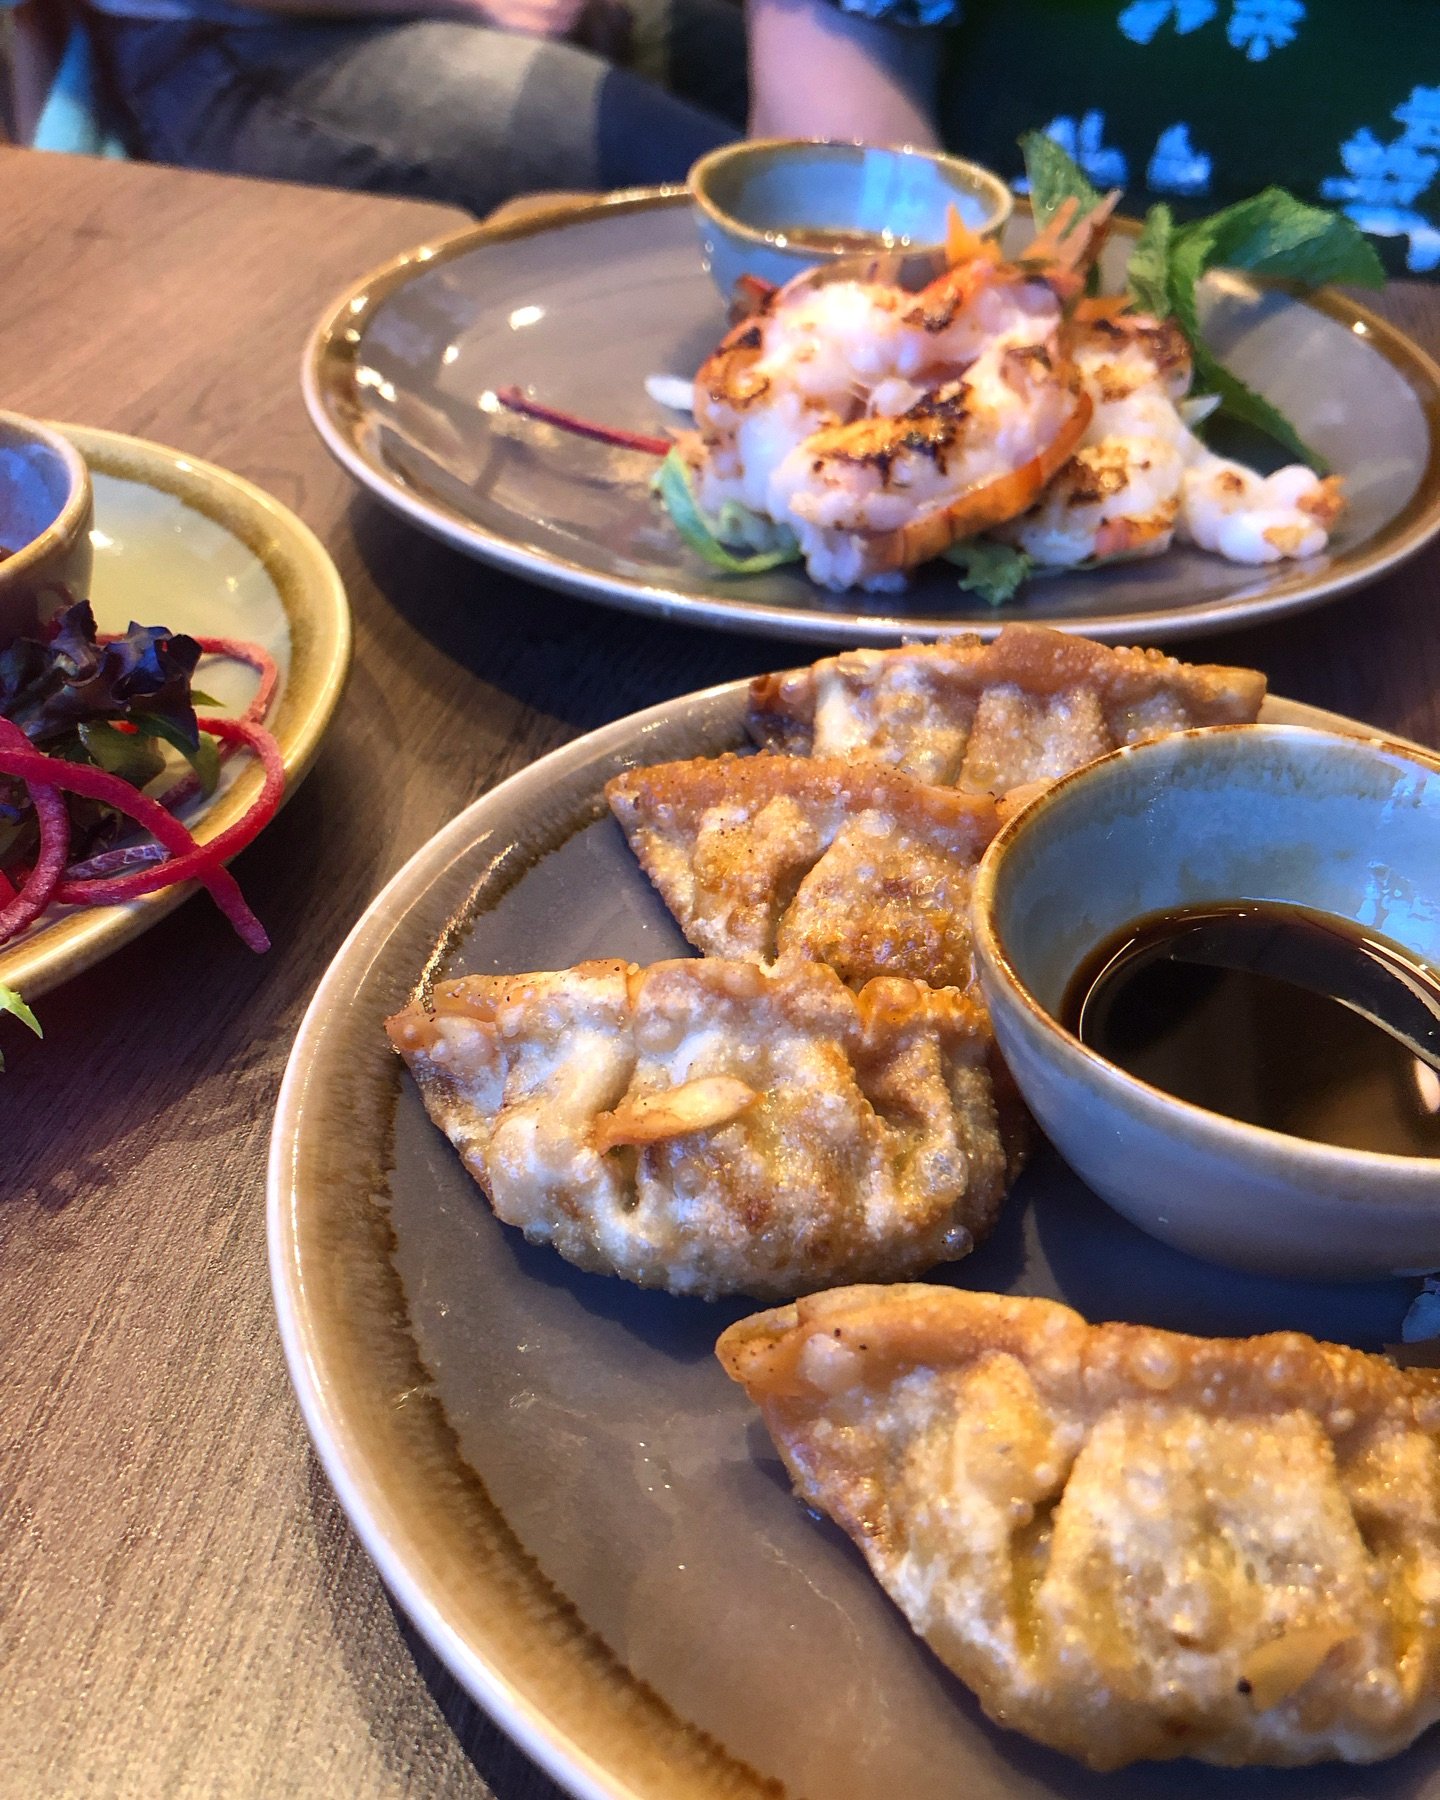 We couldn&rsquo;t resist trying out the new authentic Thai and Malay restaurant in St Albans, @sukawatee_stalbans 😍

A lovely atmosphere, friendly and helpful staff and plenty of choice on the menu, we loved it! We can definitely recommend the Veget